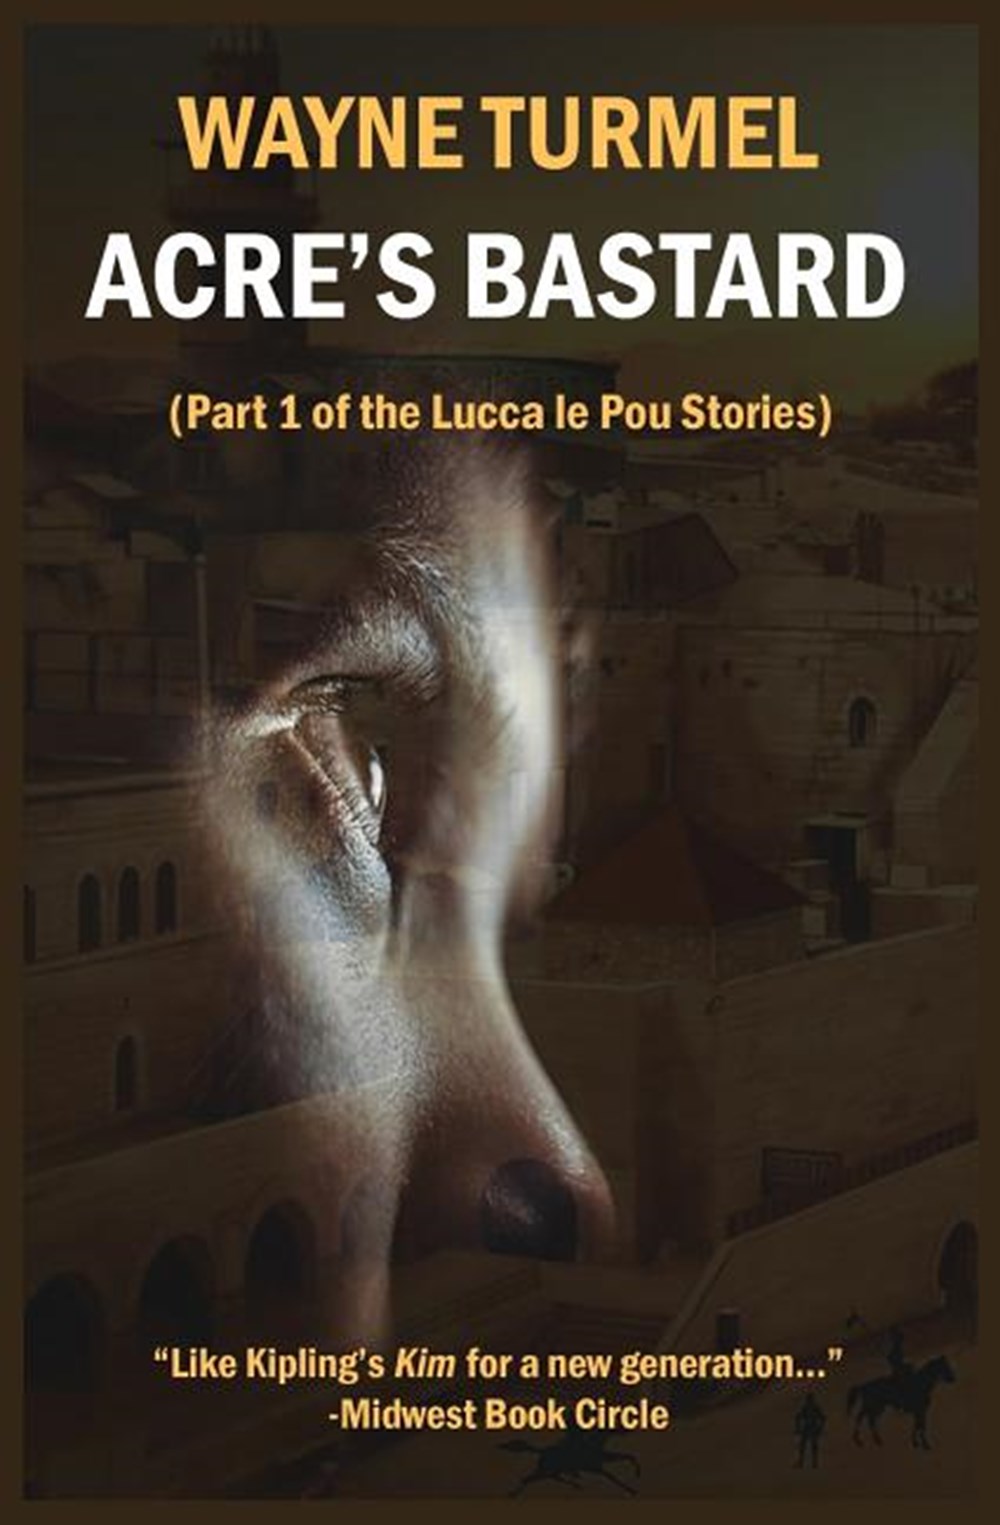 Acre's Bastard: Historical Fiction from the Crusades